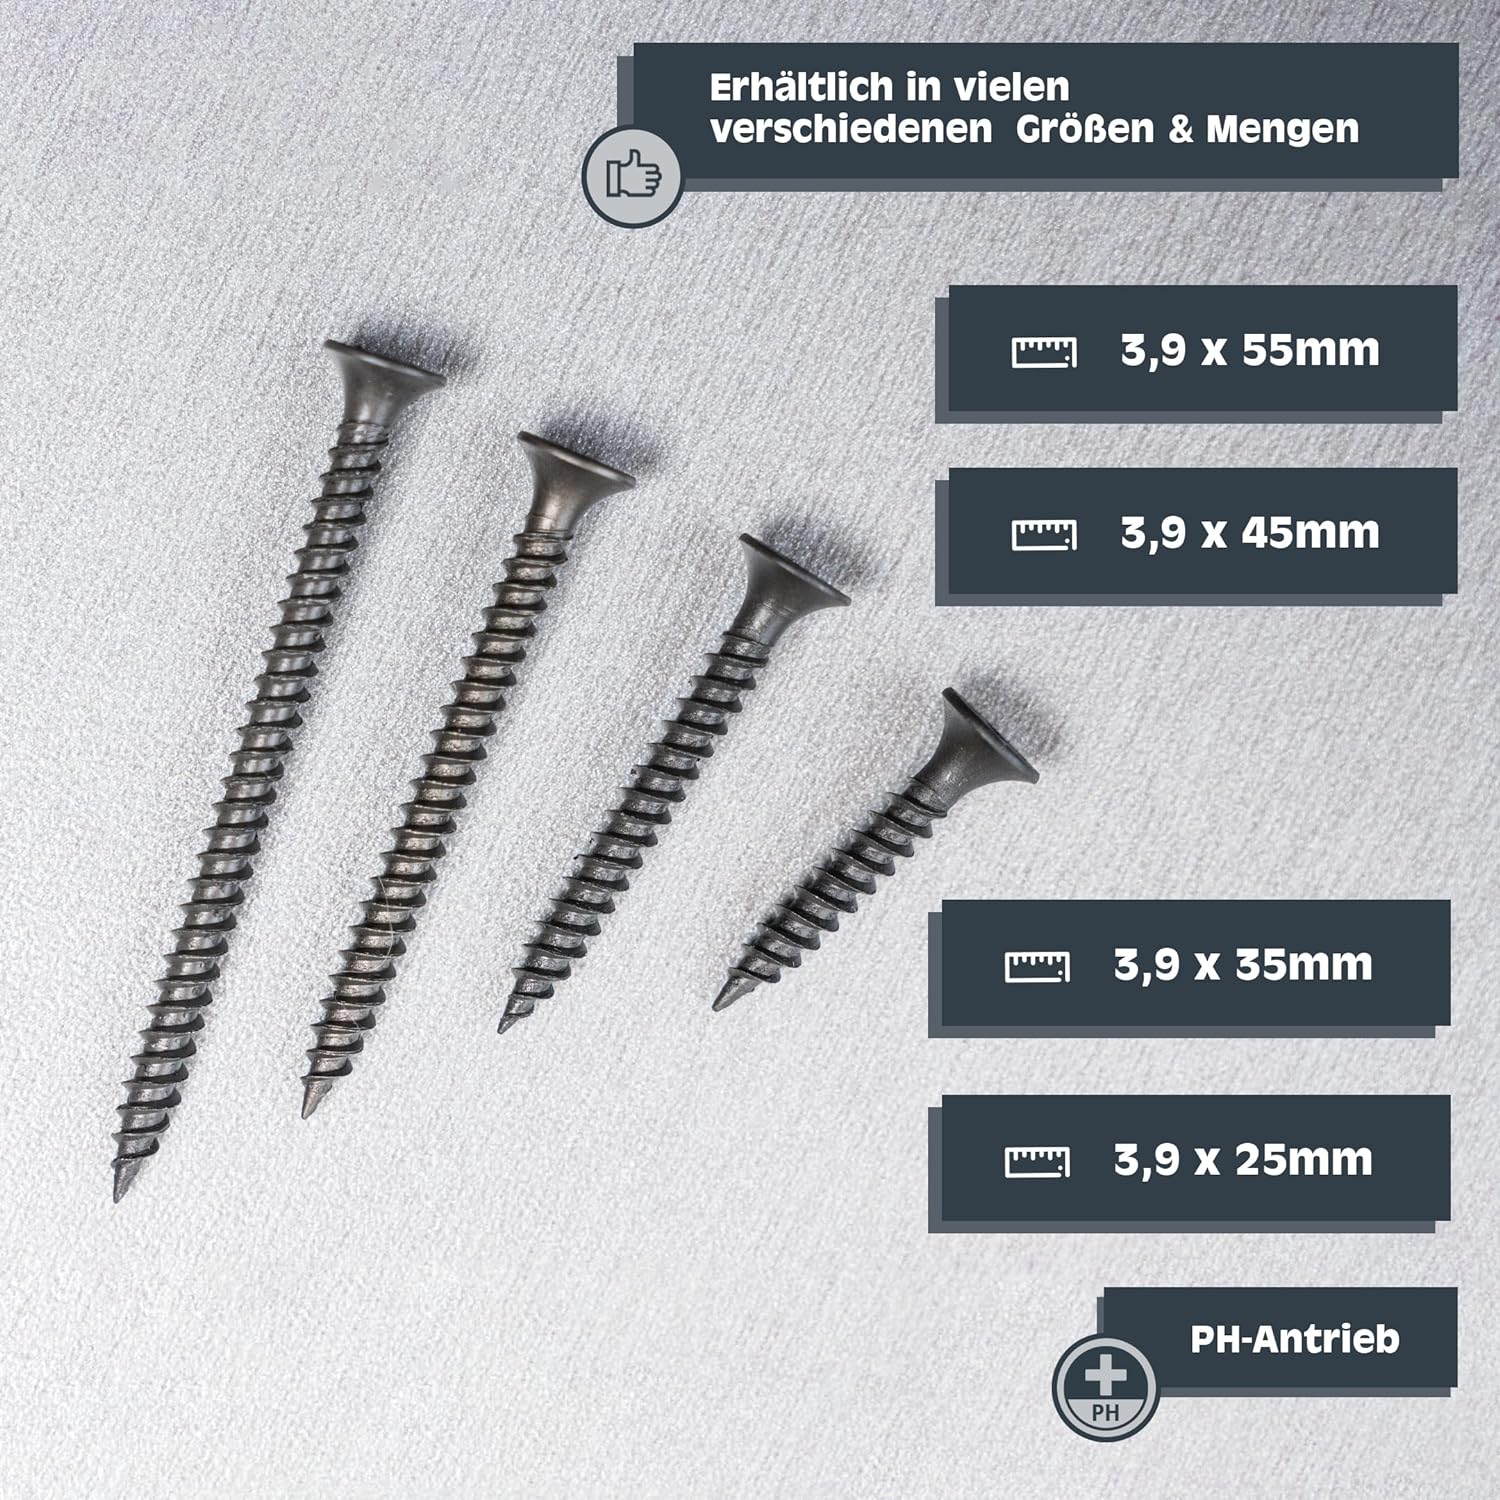 Gray color drywall screws are commonly used in construction and carpentry projects. The gray color is typically a result of a zinc coating, which provides corrosion resistance and durability. These screws are designed to securely fasten drywall to wood or metal studs, and their color can help them blend in with the surrounding materials. When using gray color drywall screws, it's important to select the appropriate length and gauge for the specific application to ensure a strong and reliable installation.